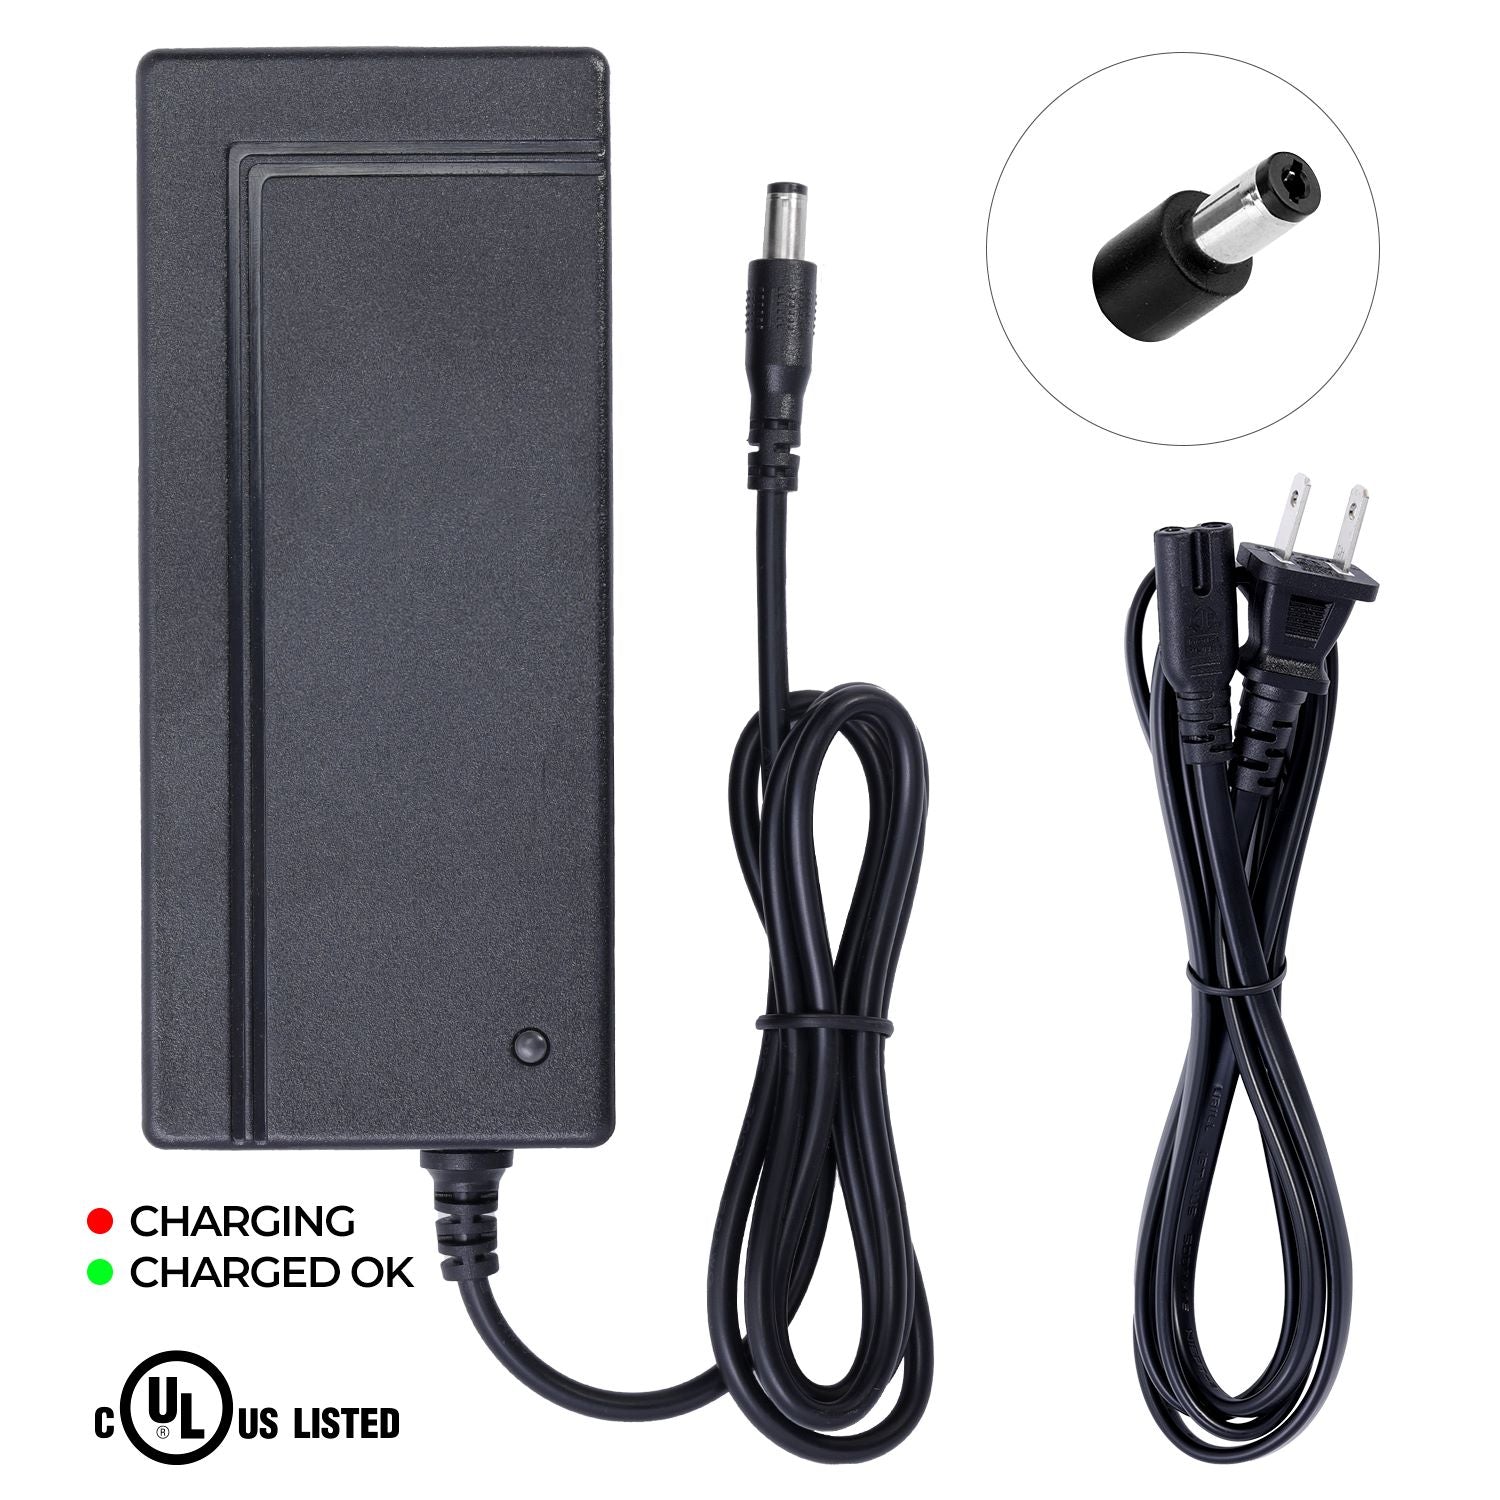 UL Listed Charger for Heybike (Please select the charger depending on your Bike Model)